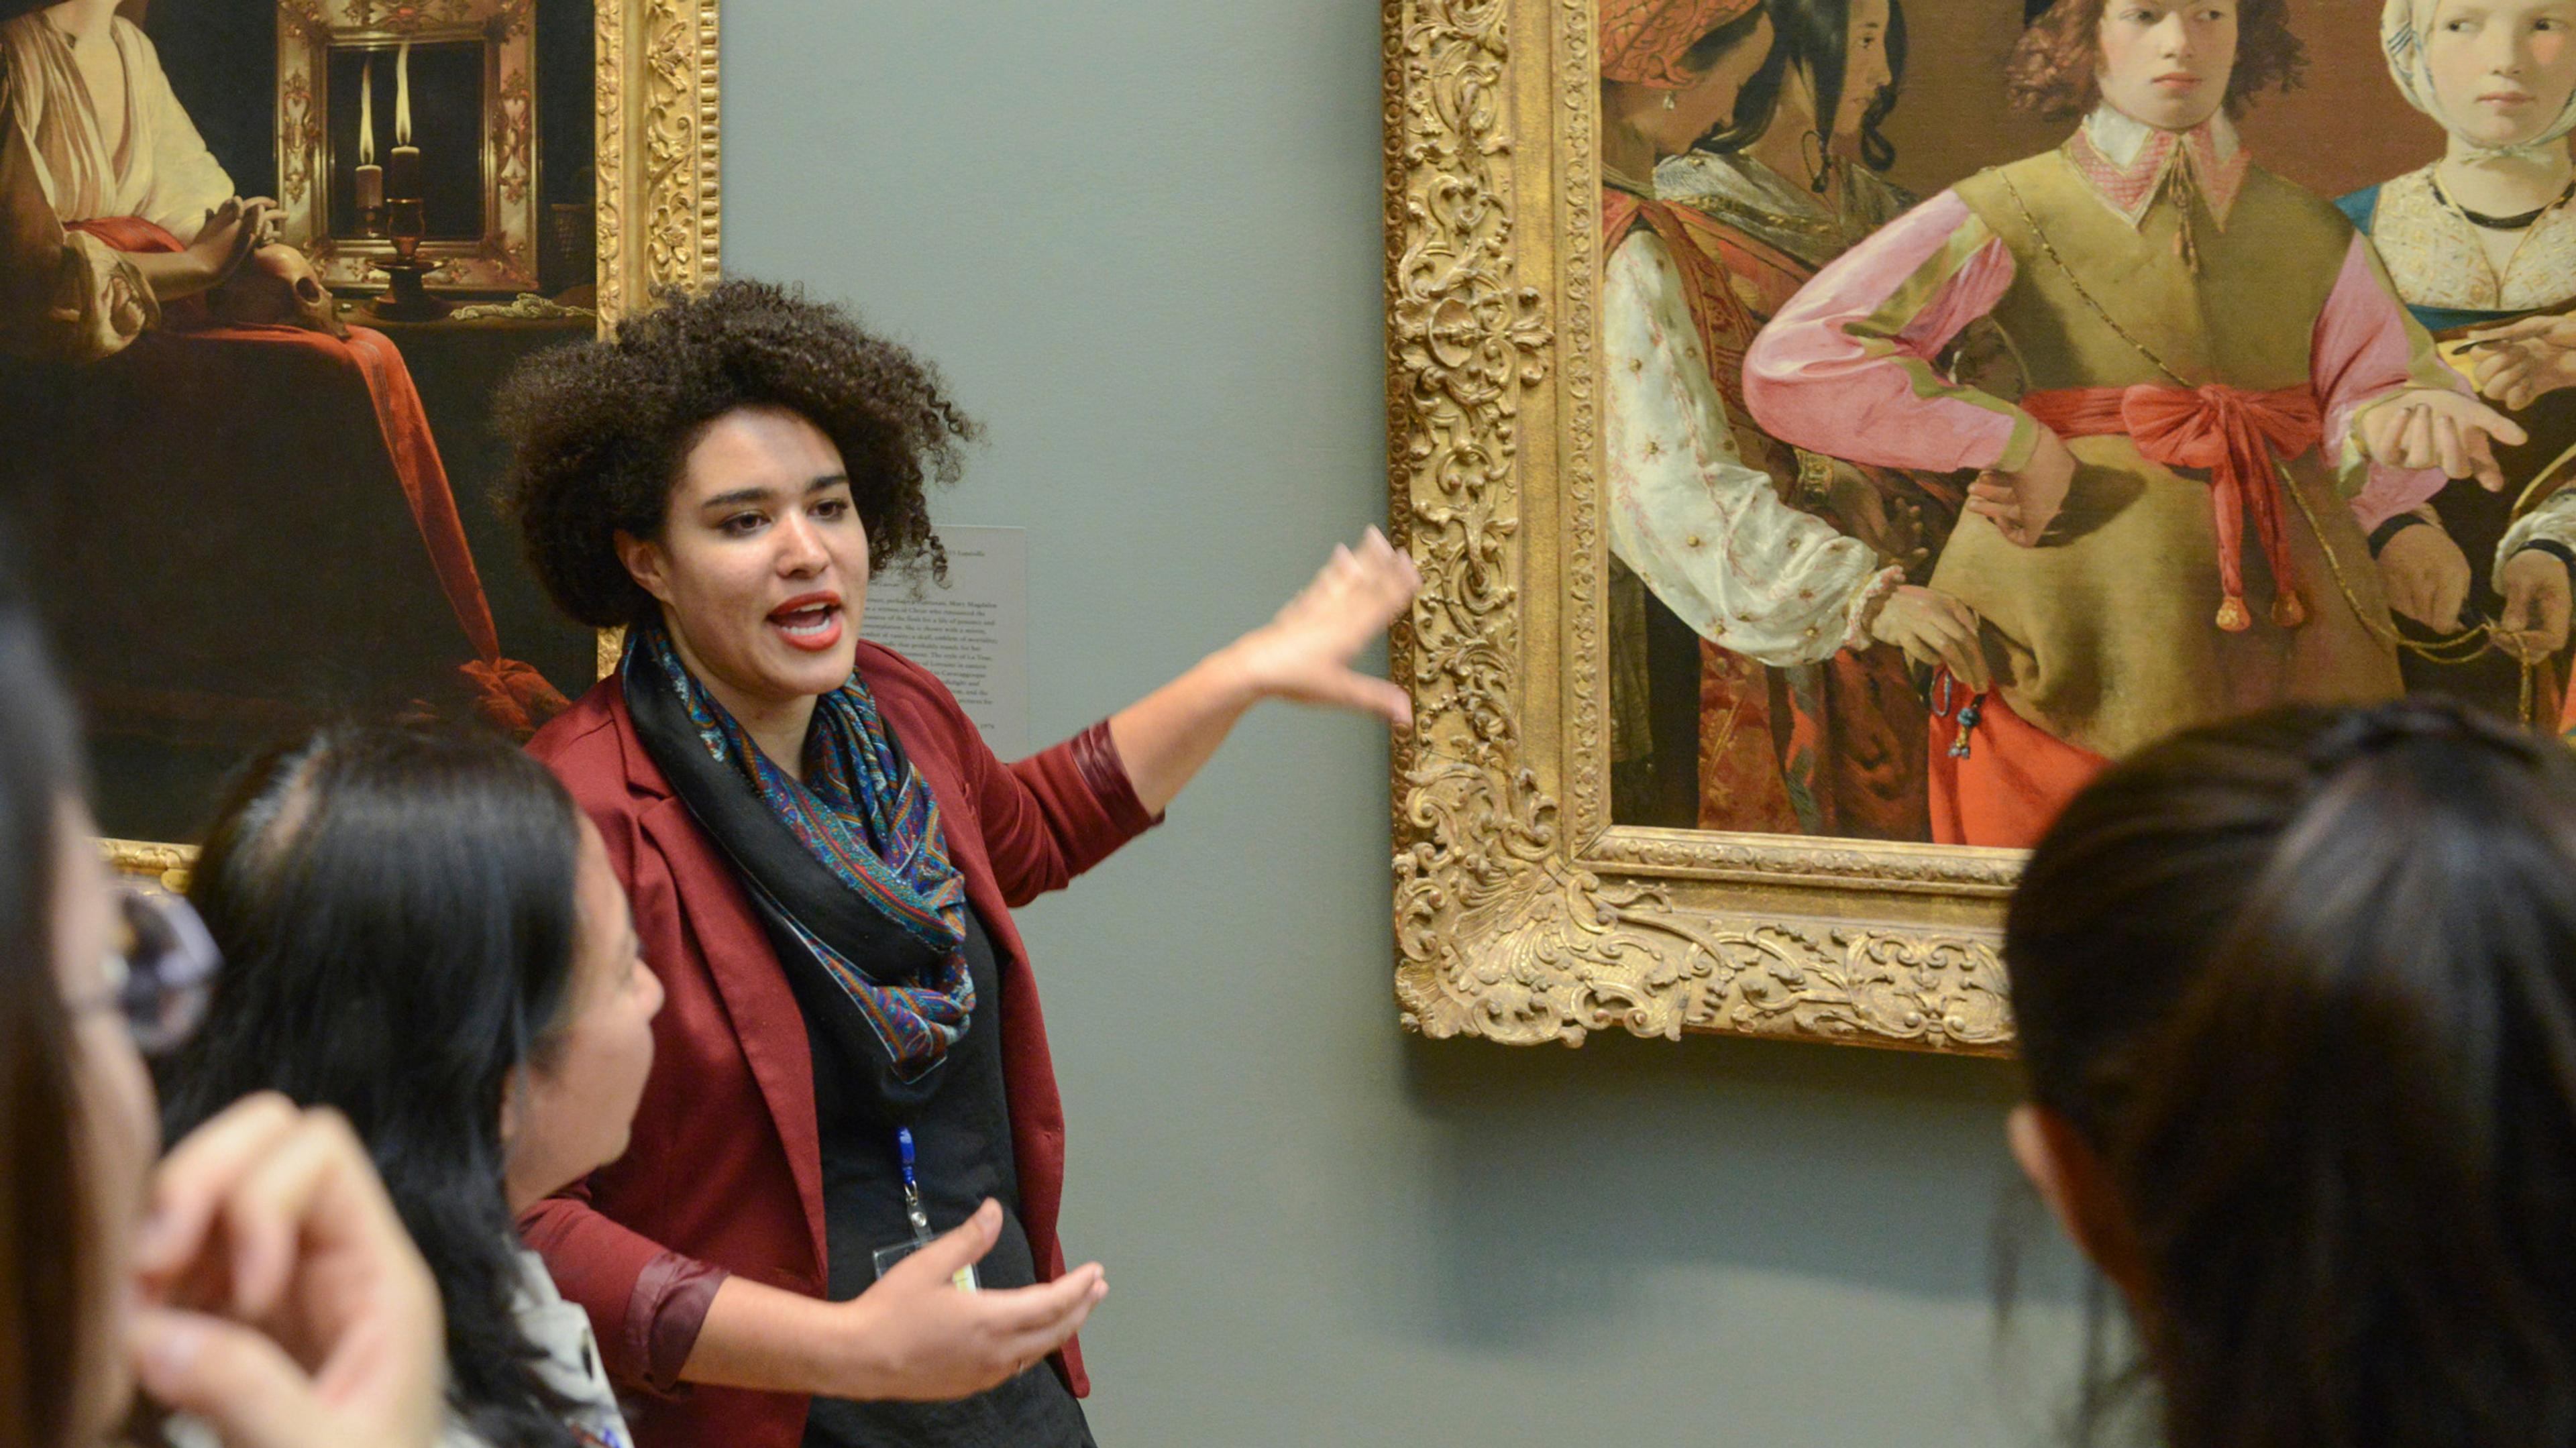 Tour Guide pointing to a painting and explaining the context to a group of visitors.